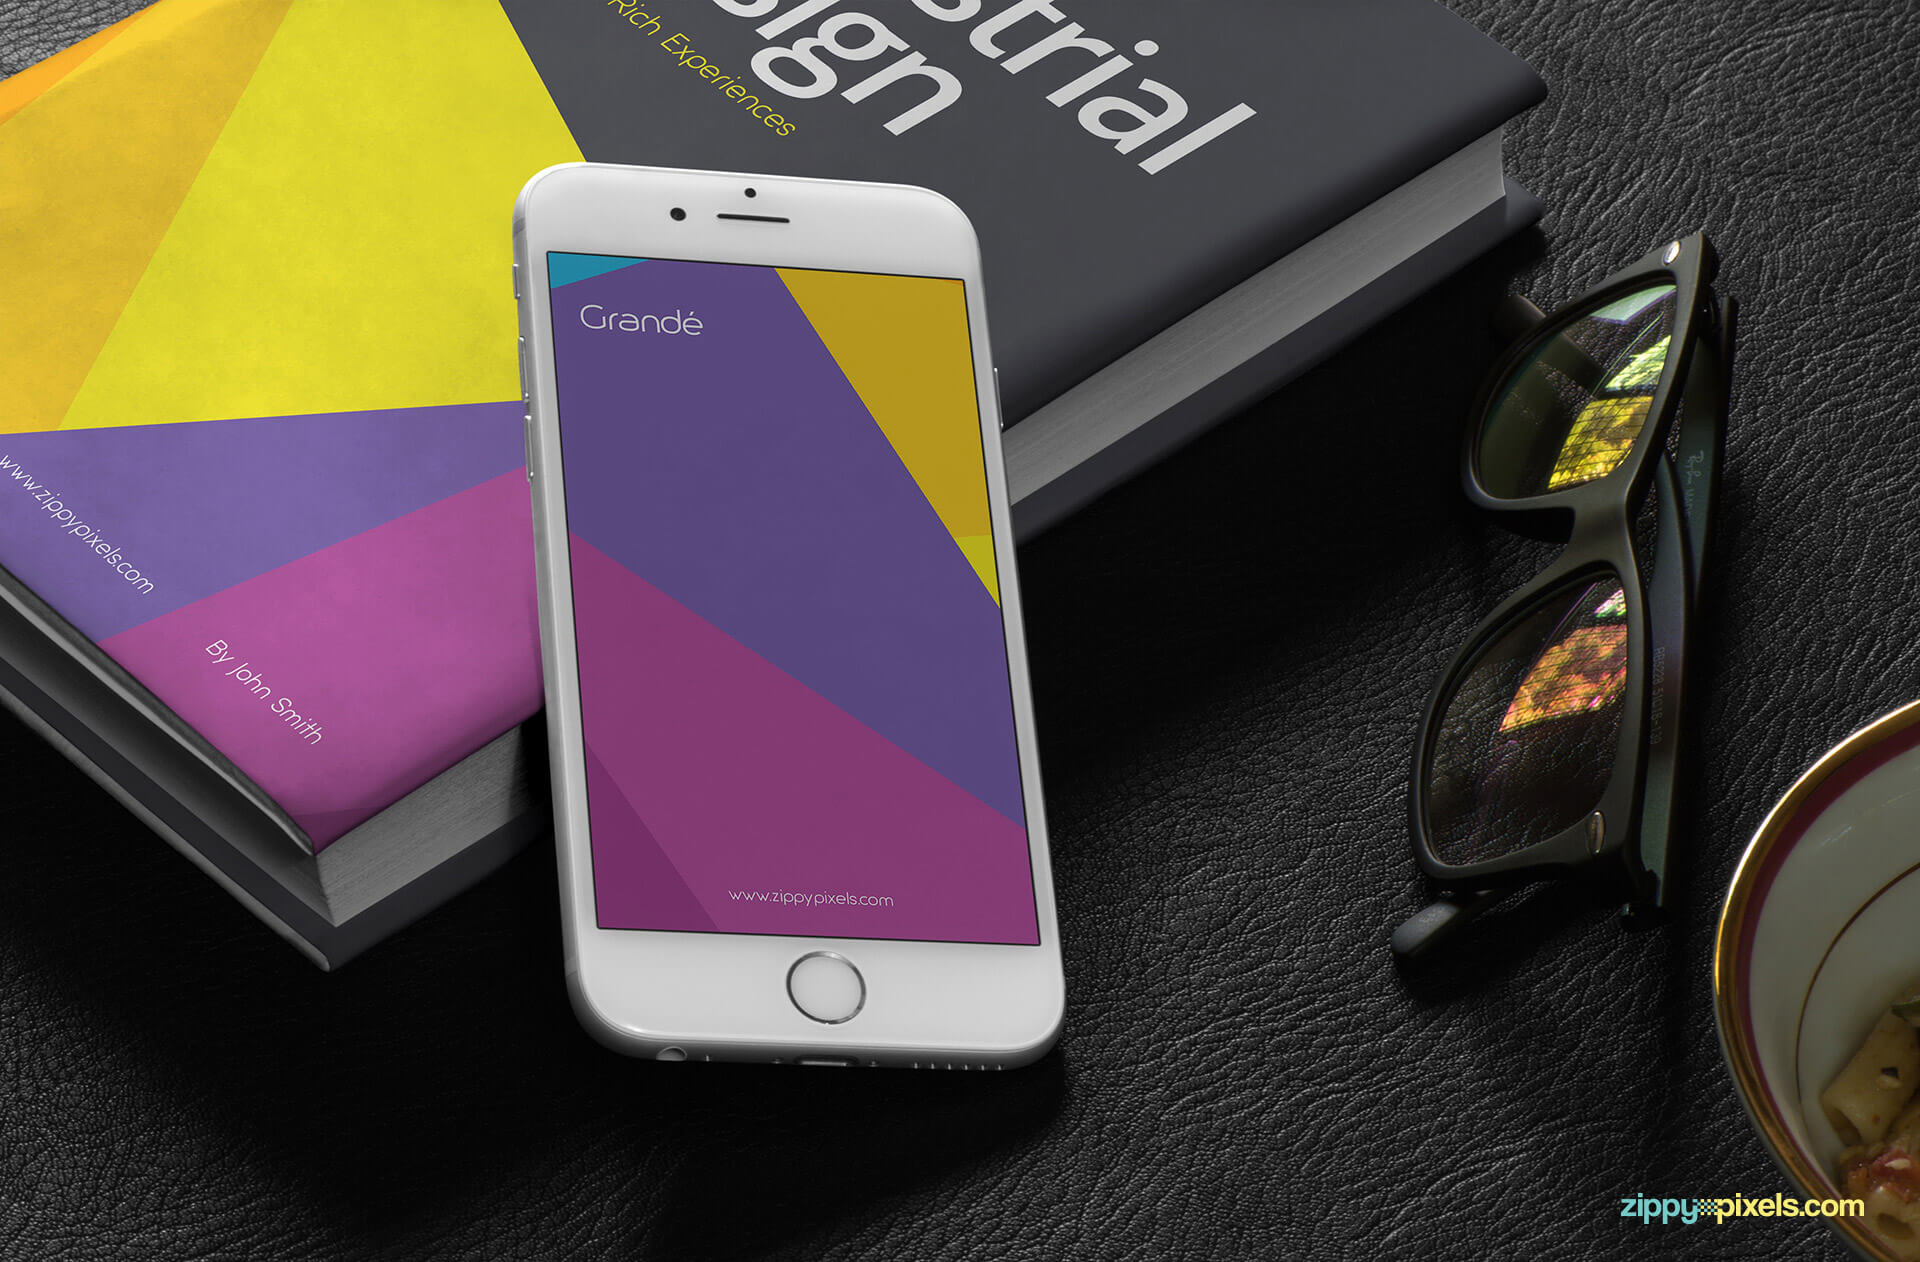 Showcase your designs in style with these iphone 6s mock-ups